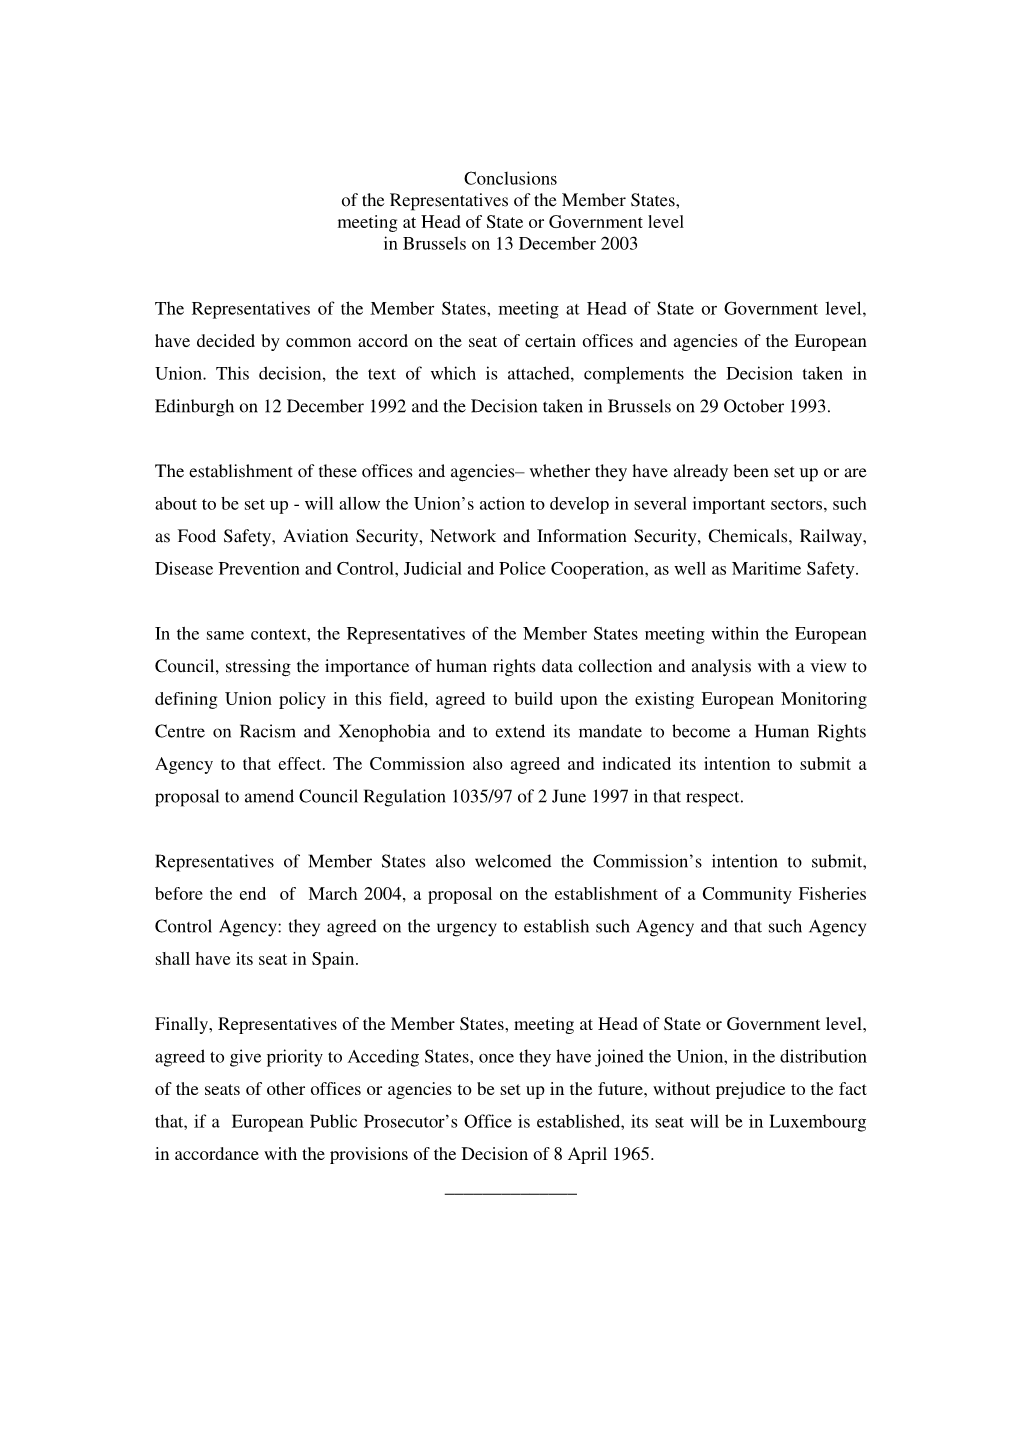 Conclusions of the Representatives of the Member States, Meeting at Head of State Or Government Level in Brussels on 13 December 2003